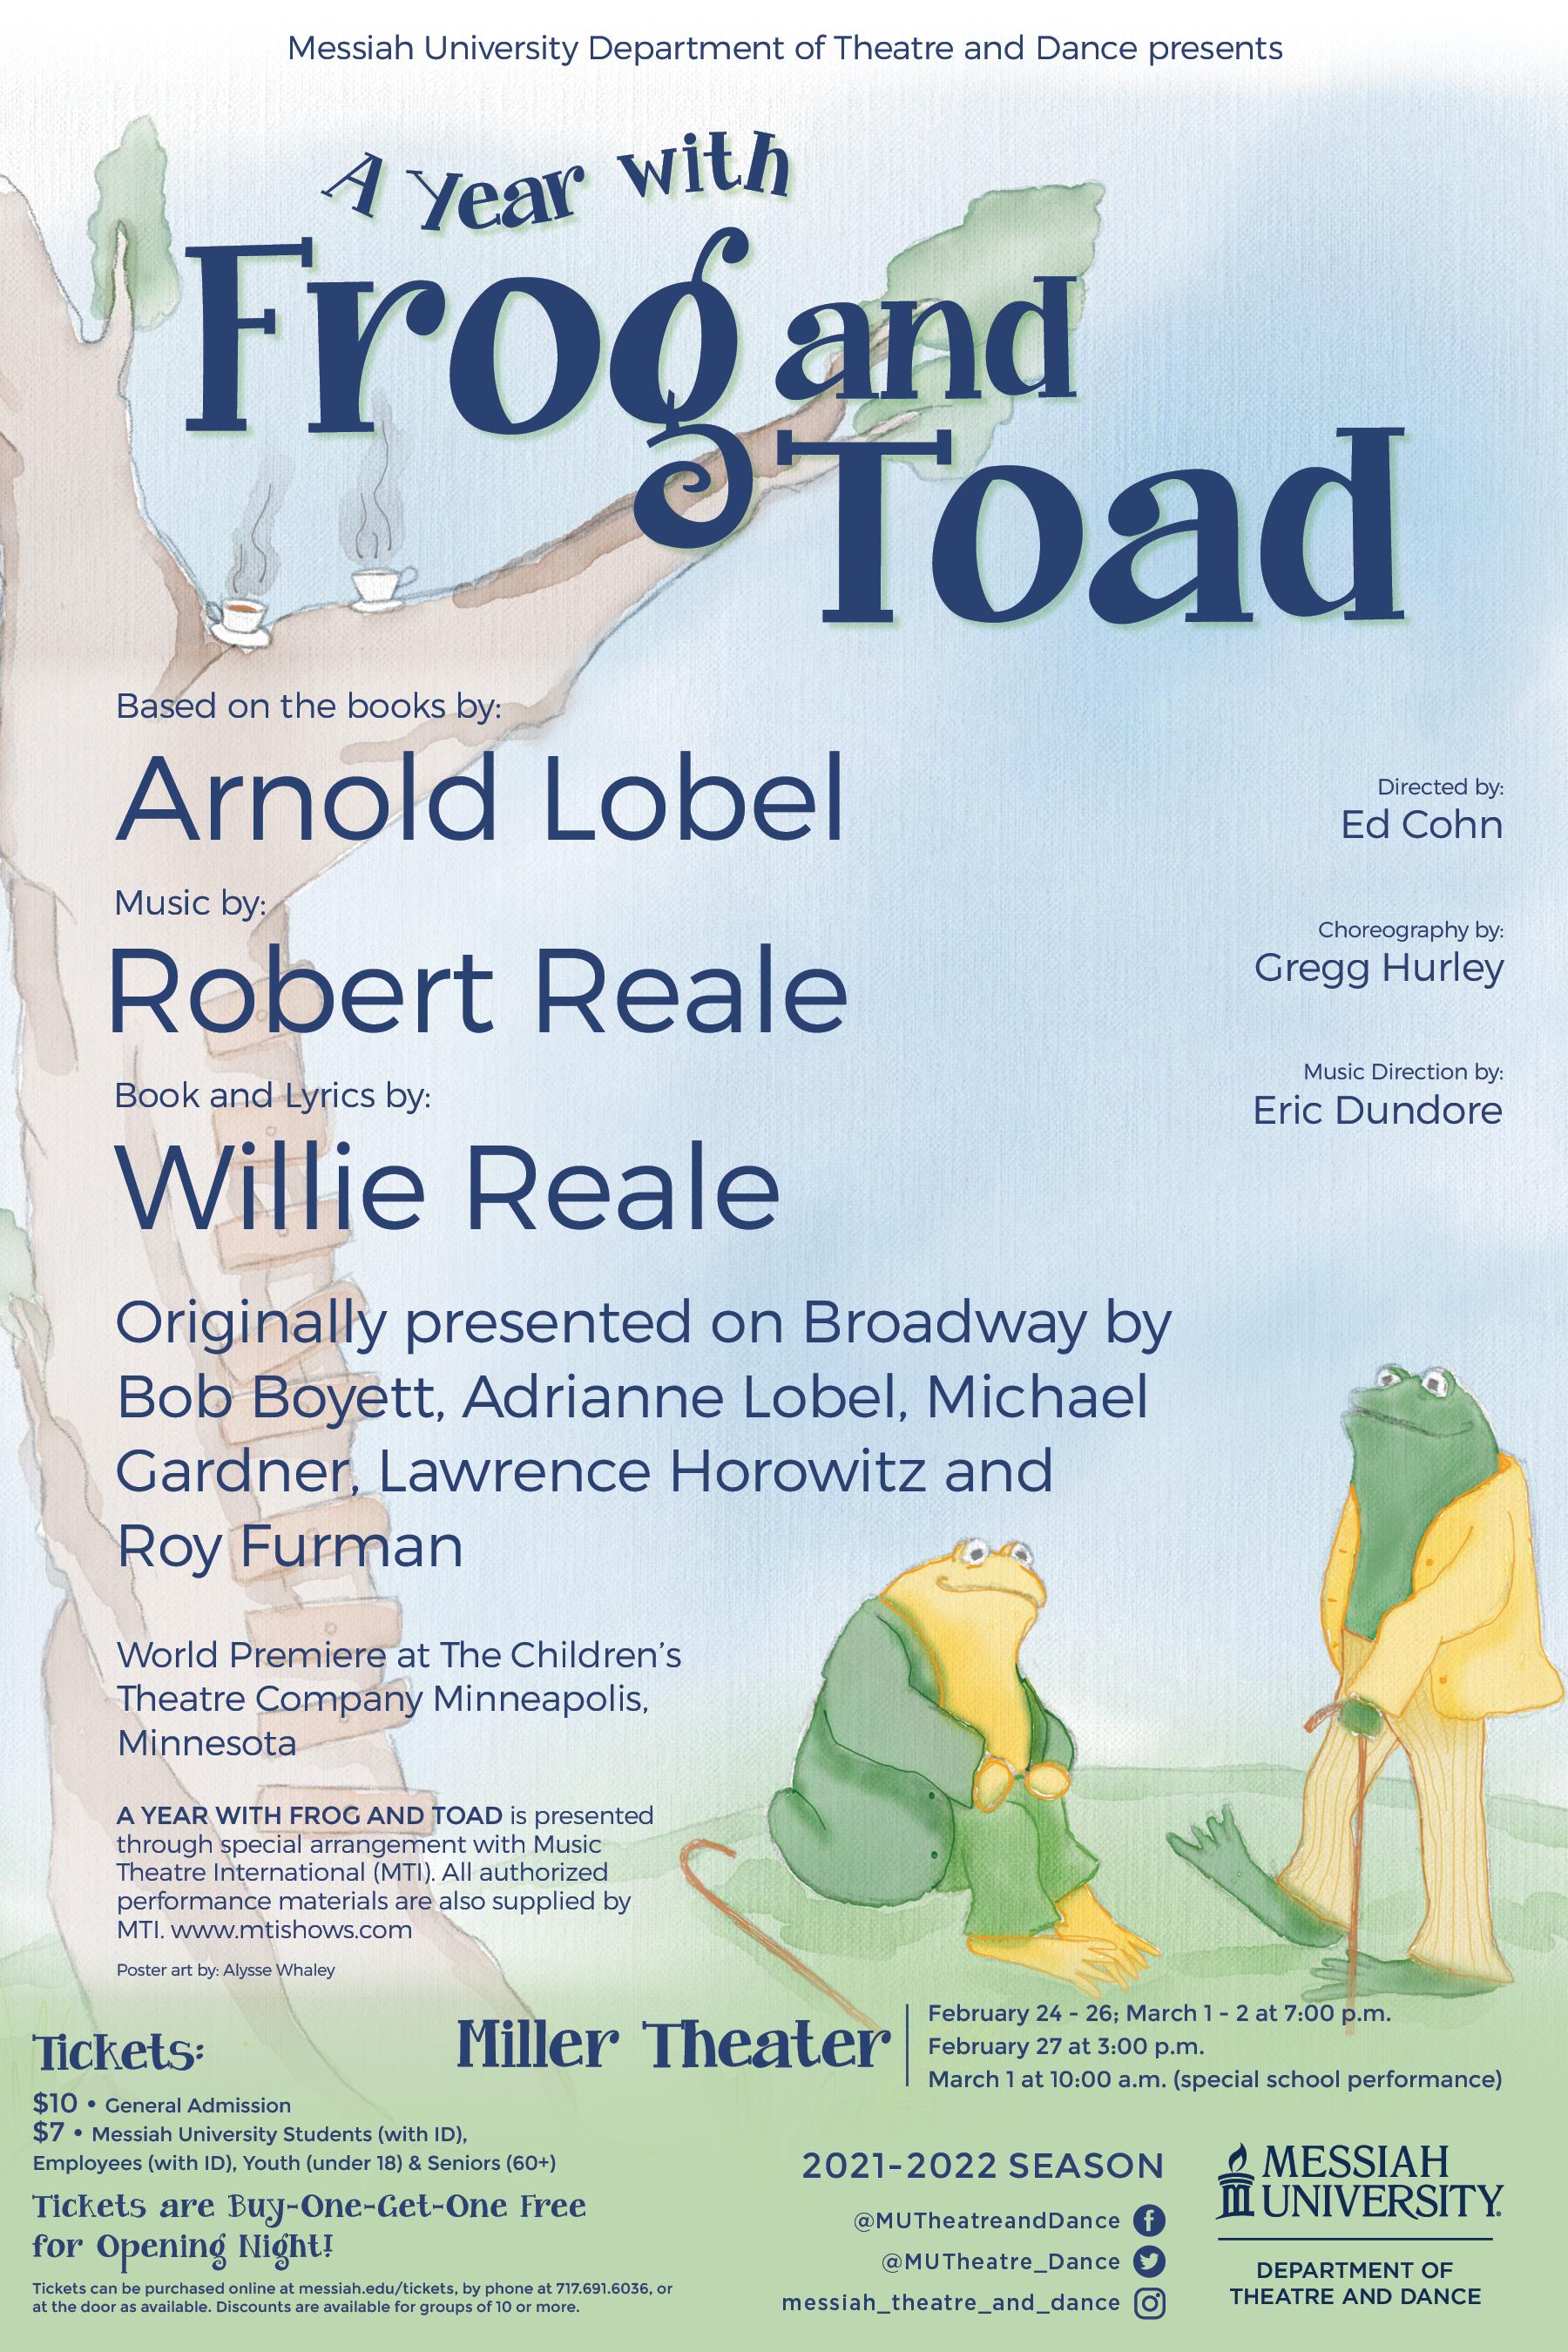 A year with frog and toad poster